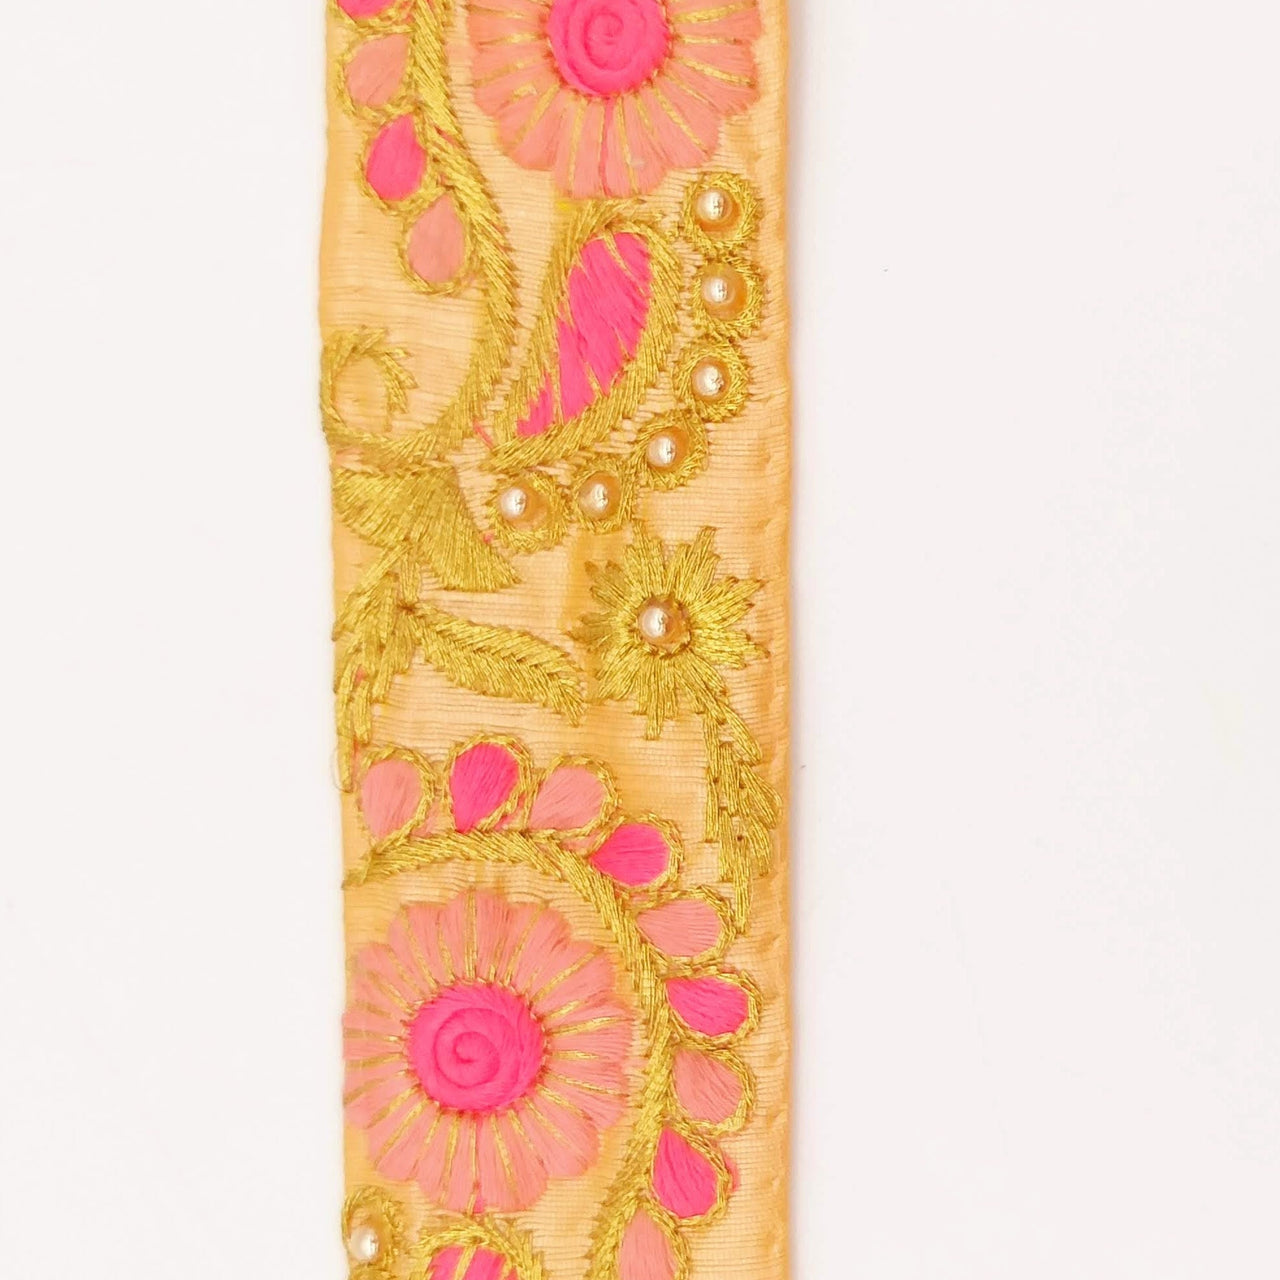 Peach Art Silk Lace Trim, Floral Embroidery in Pink, Fuchsia and Gold